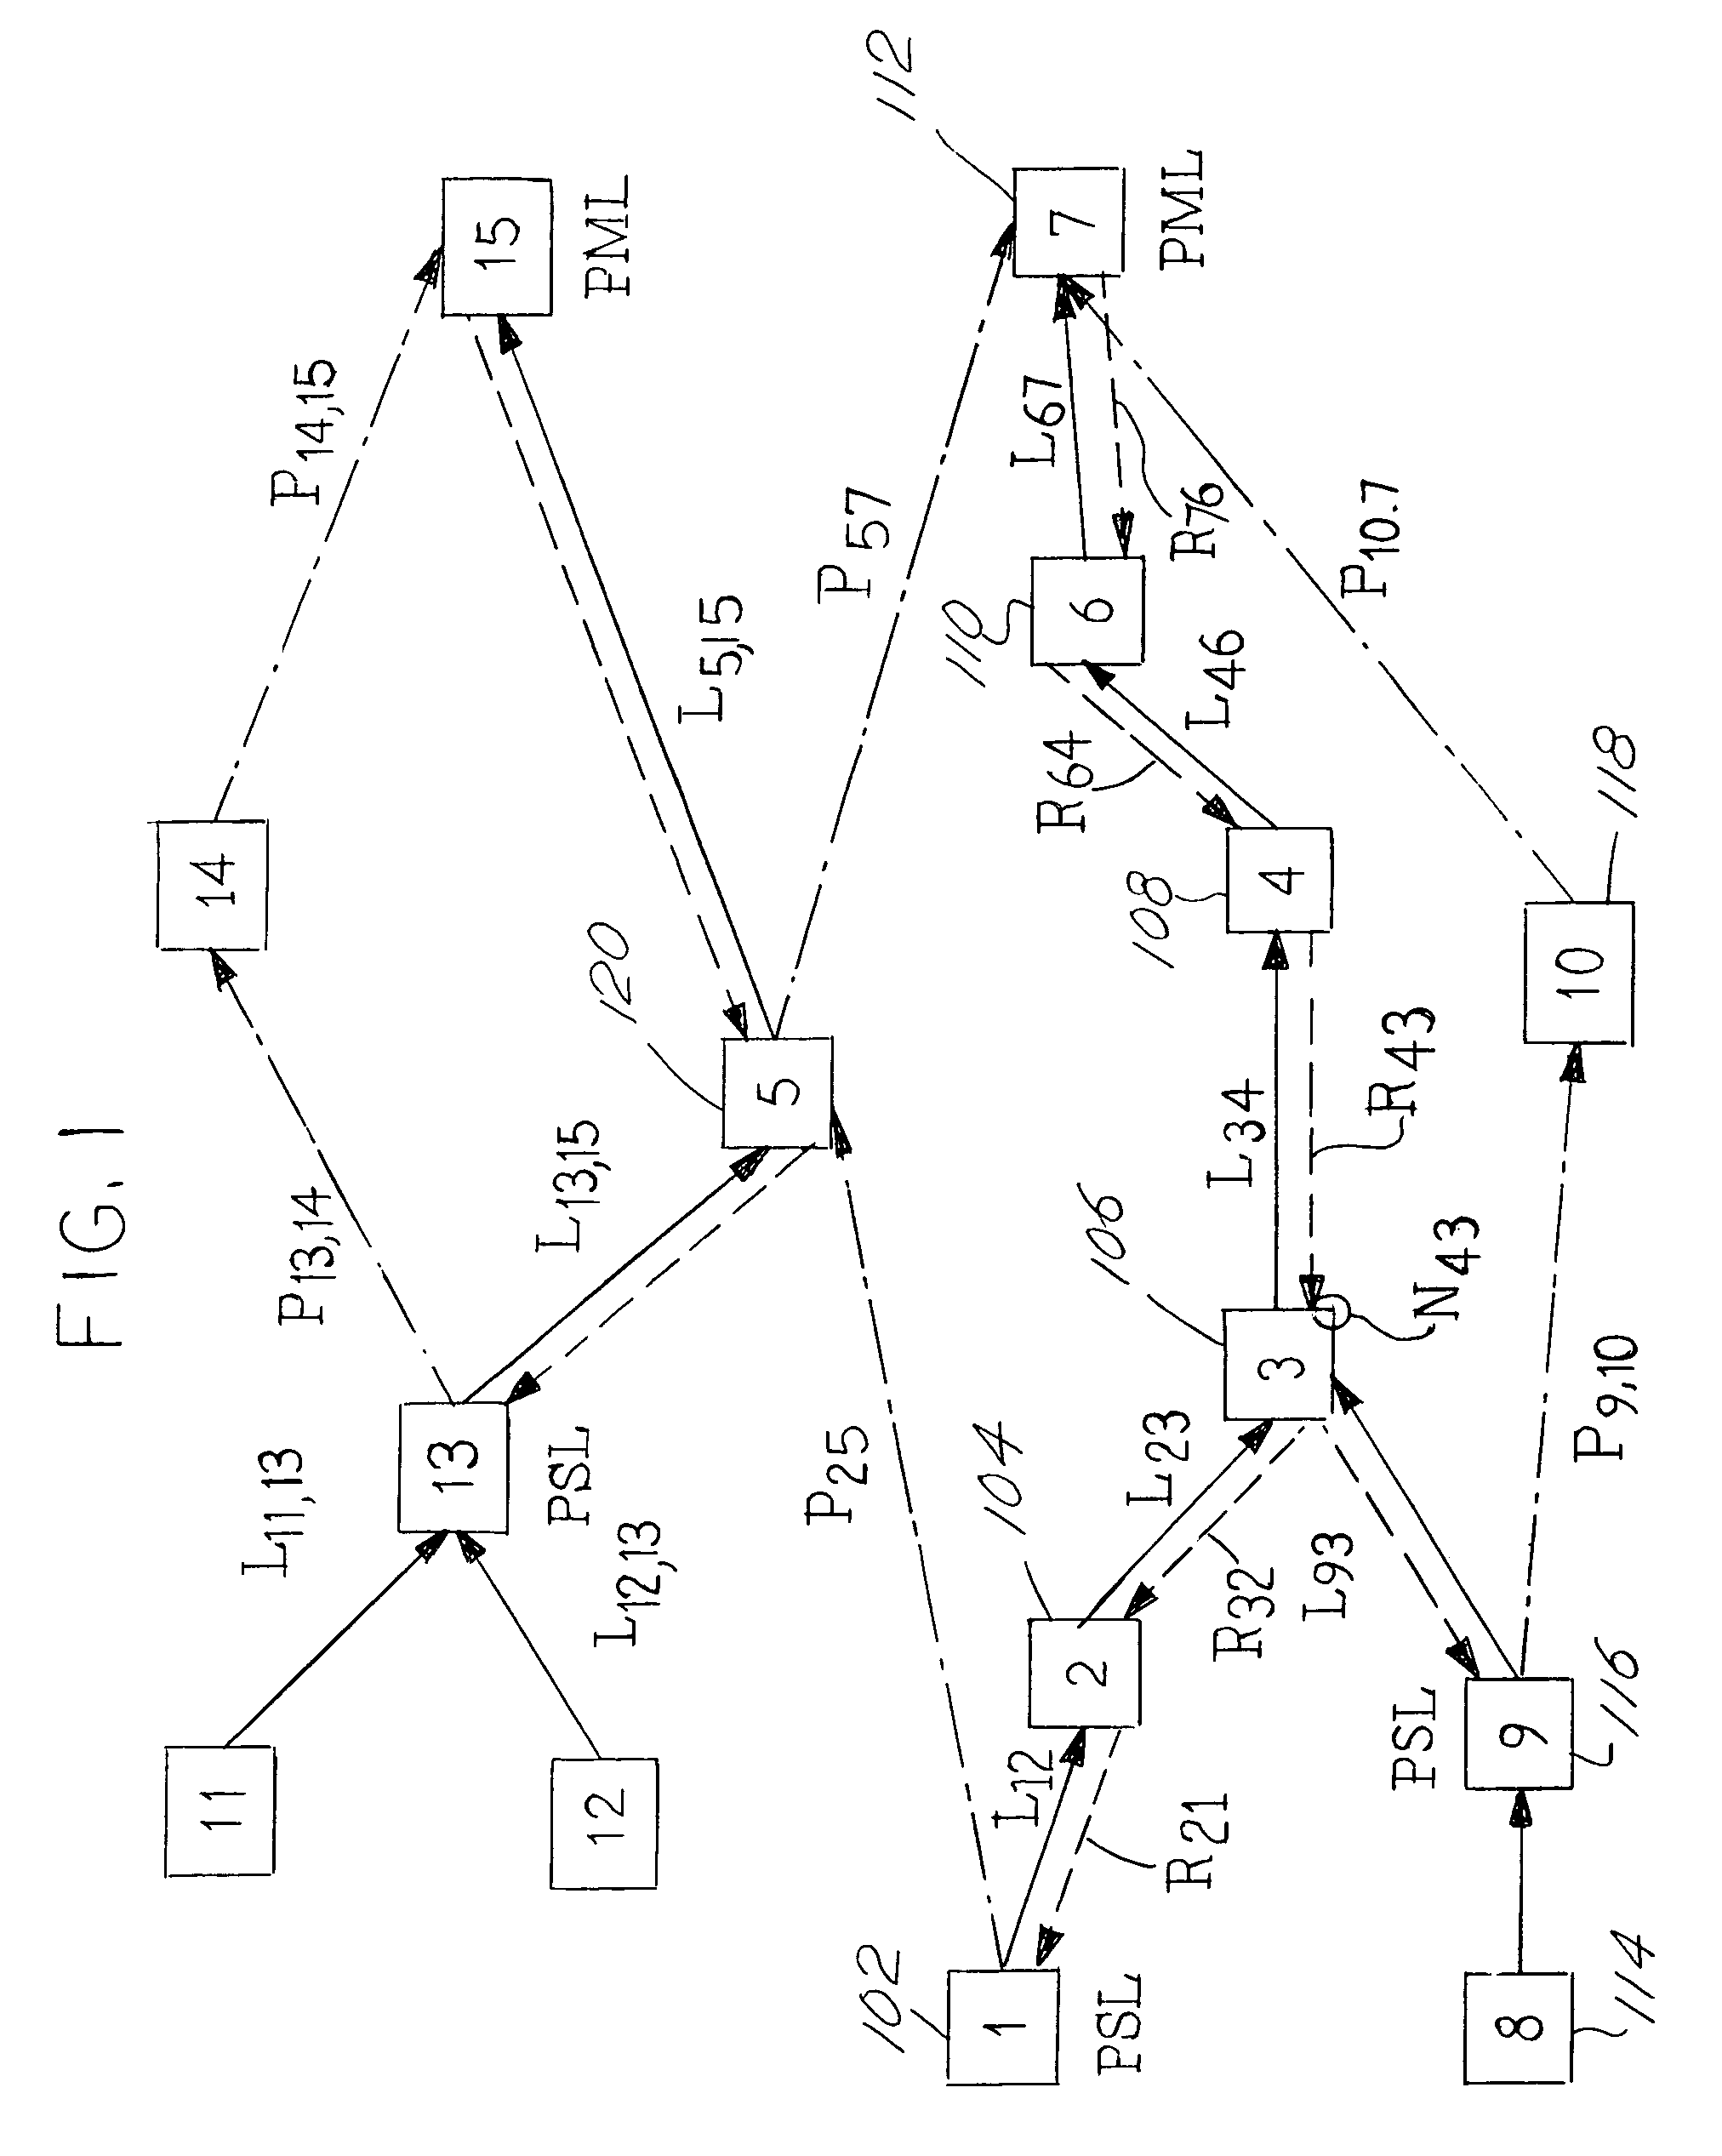 Method and apparatus for detecting MPLS network failures